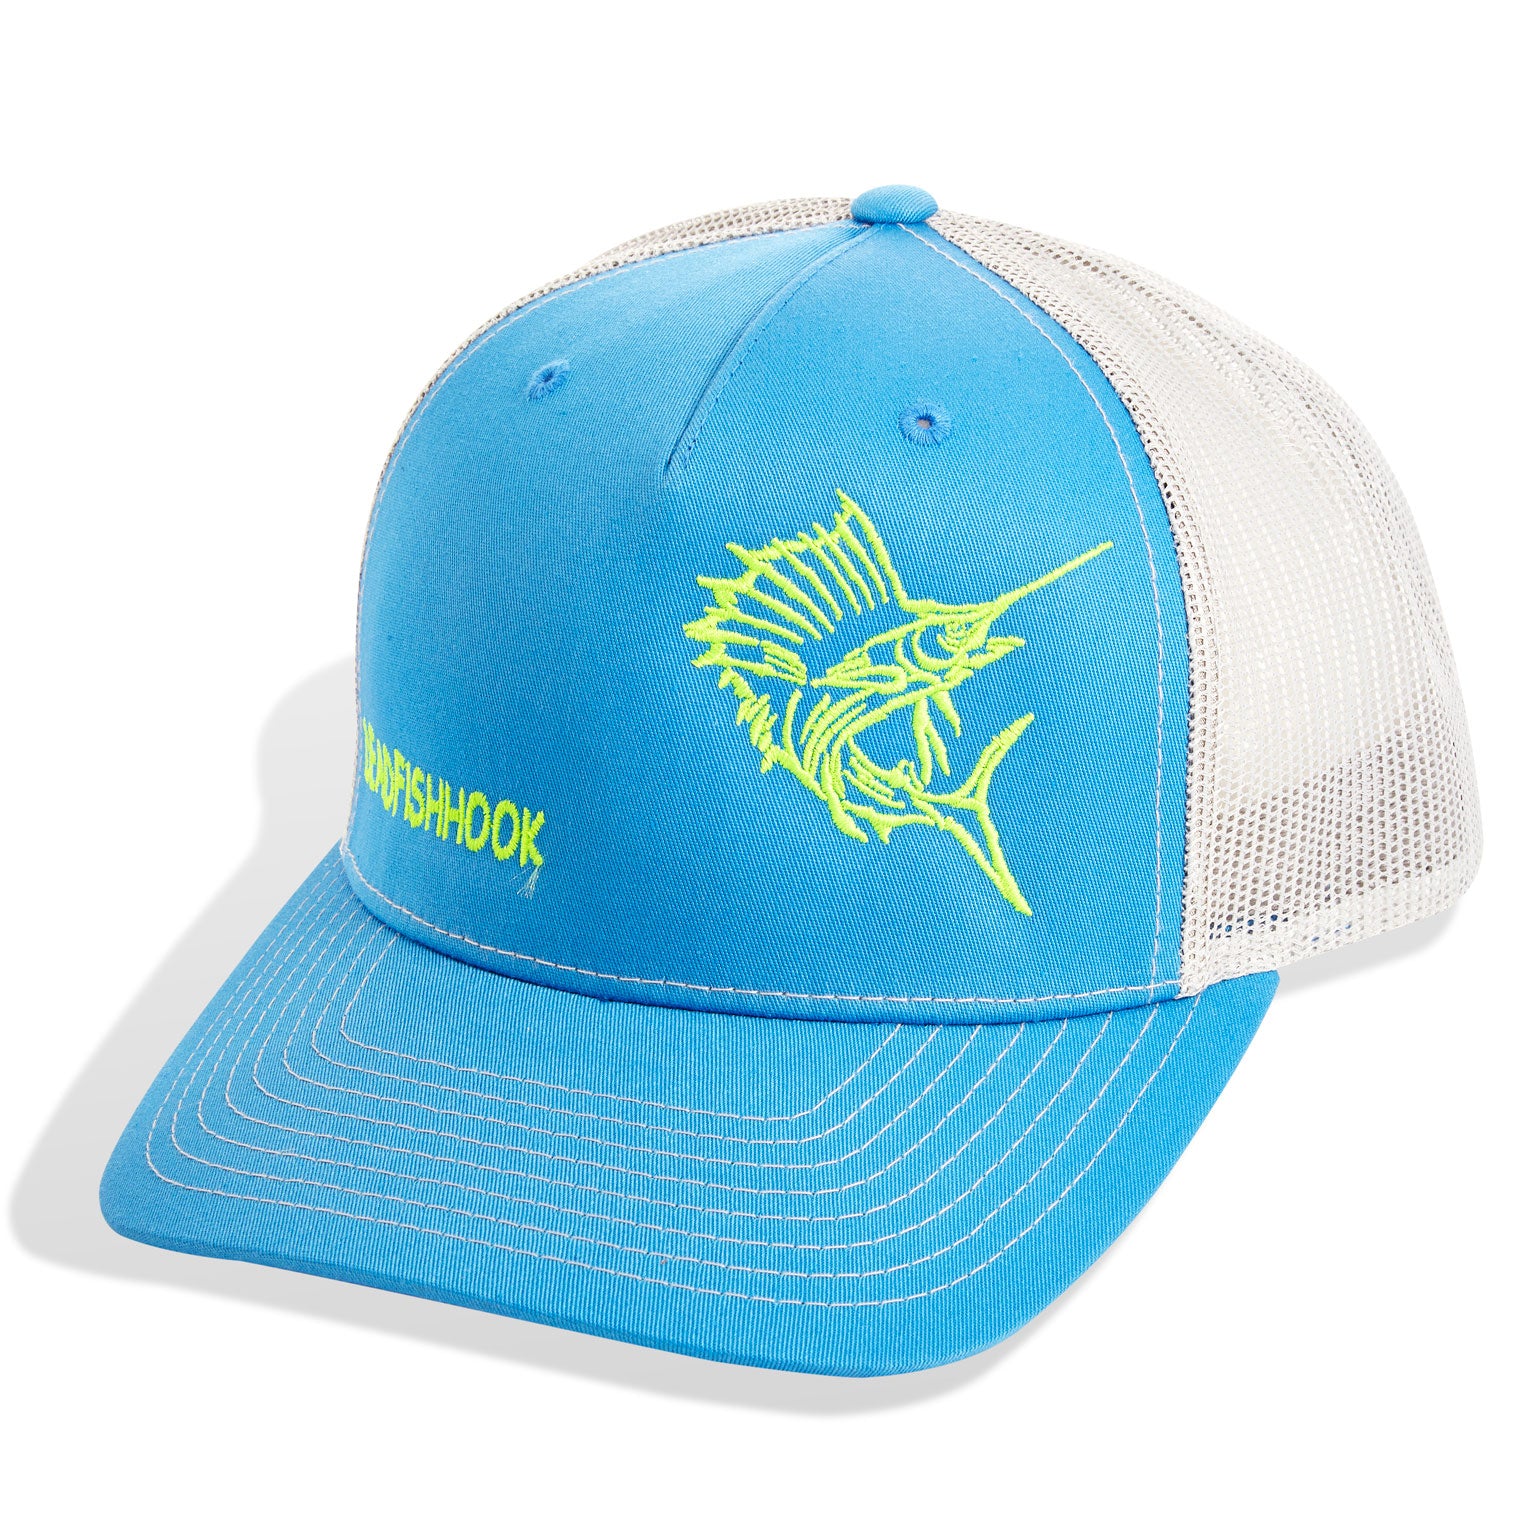 Dead Fish Hook light blue and white sailfish trucker hat with lime green details front